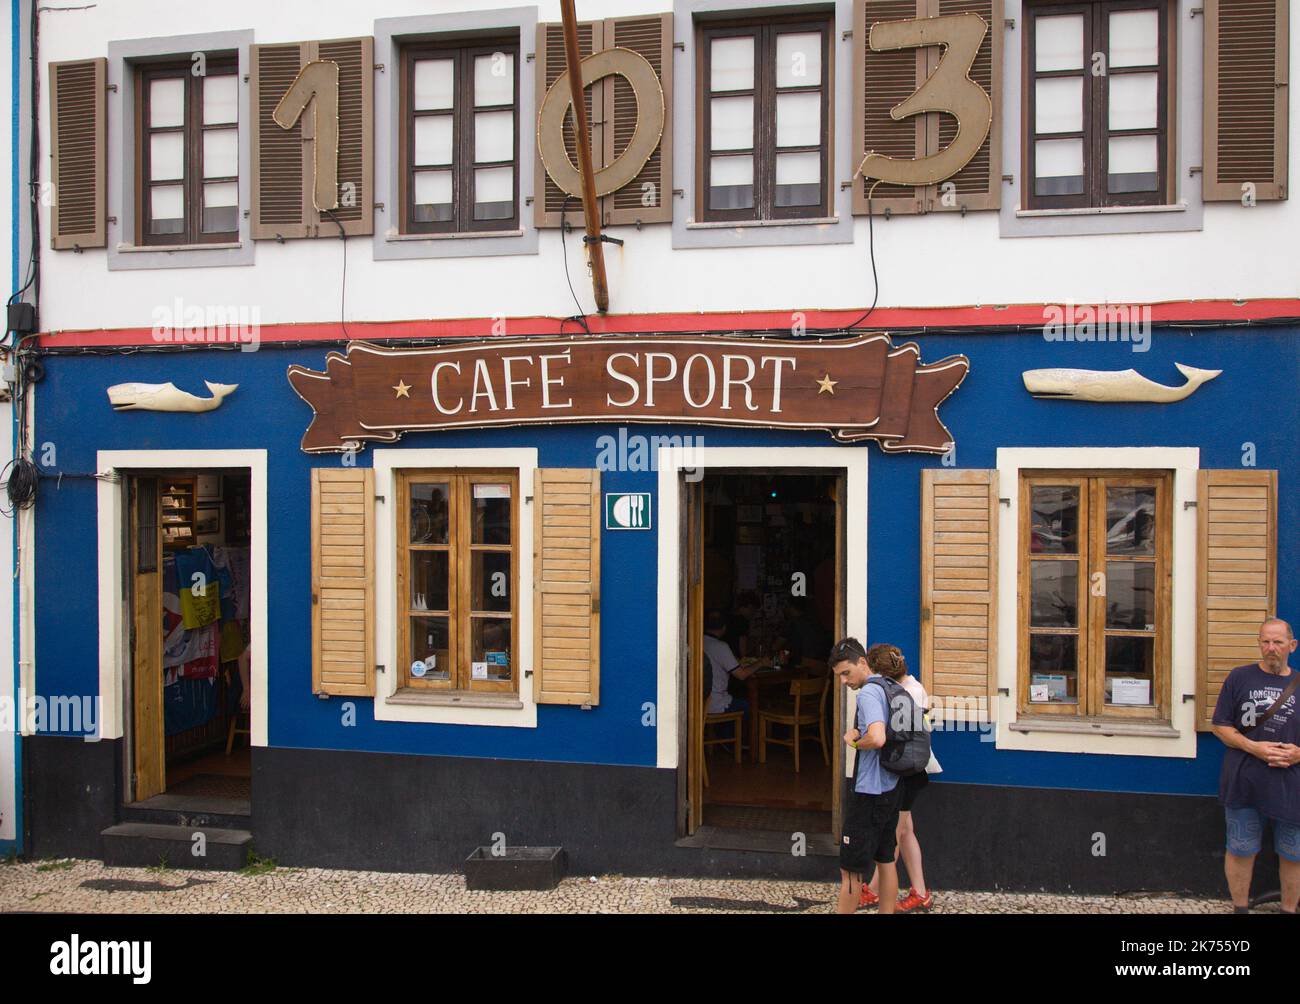 Portugal, Azores, Faial Island, Horta, Peter Cafe Sport, people, Stock Photo